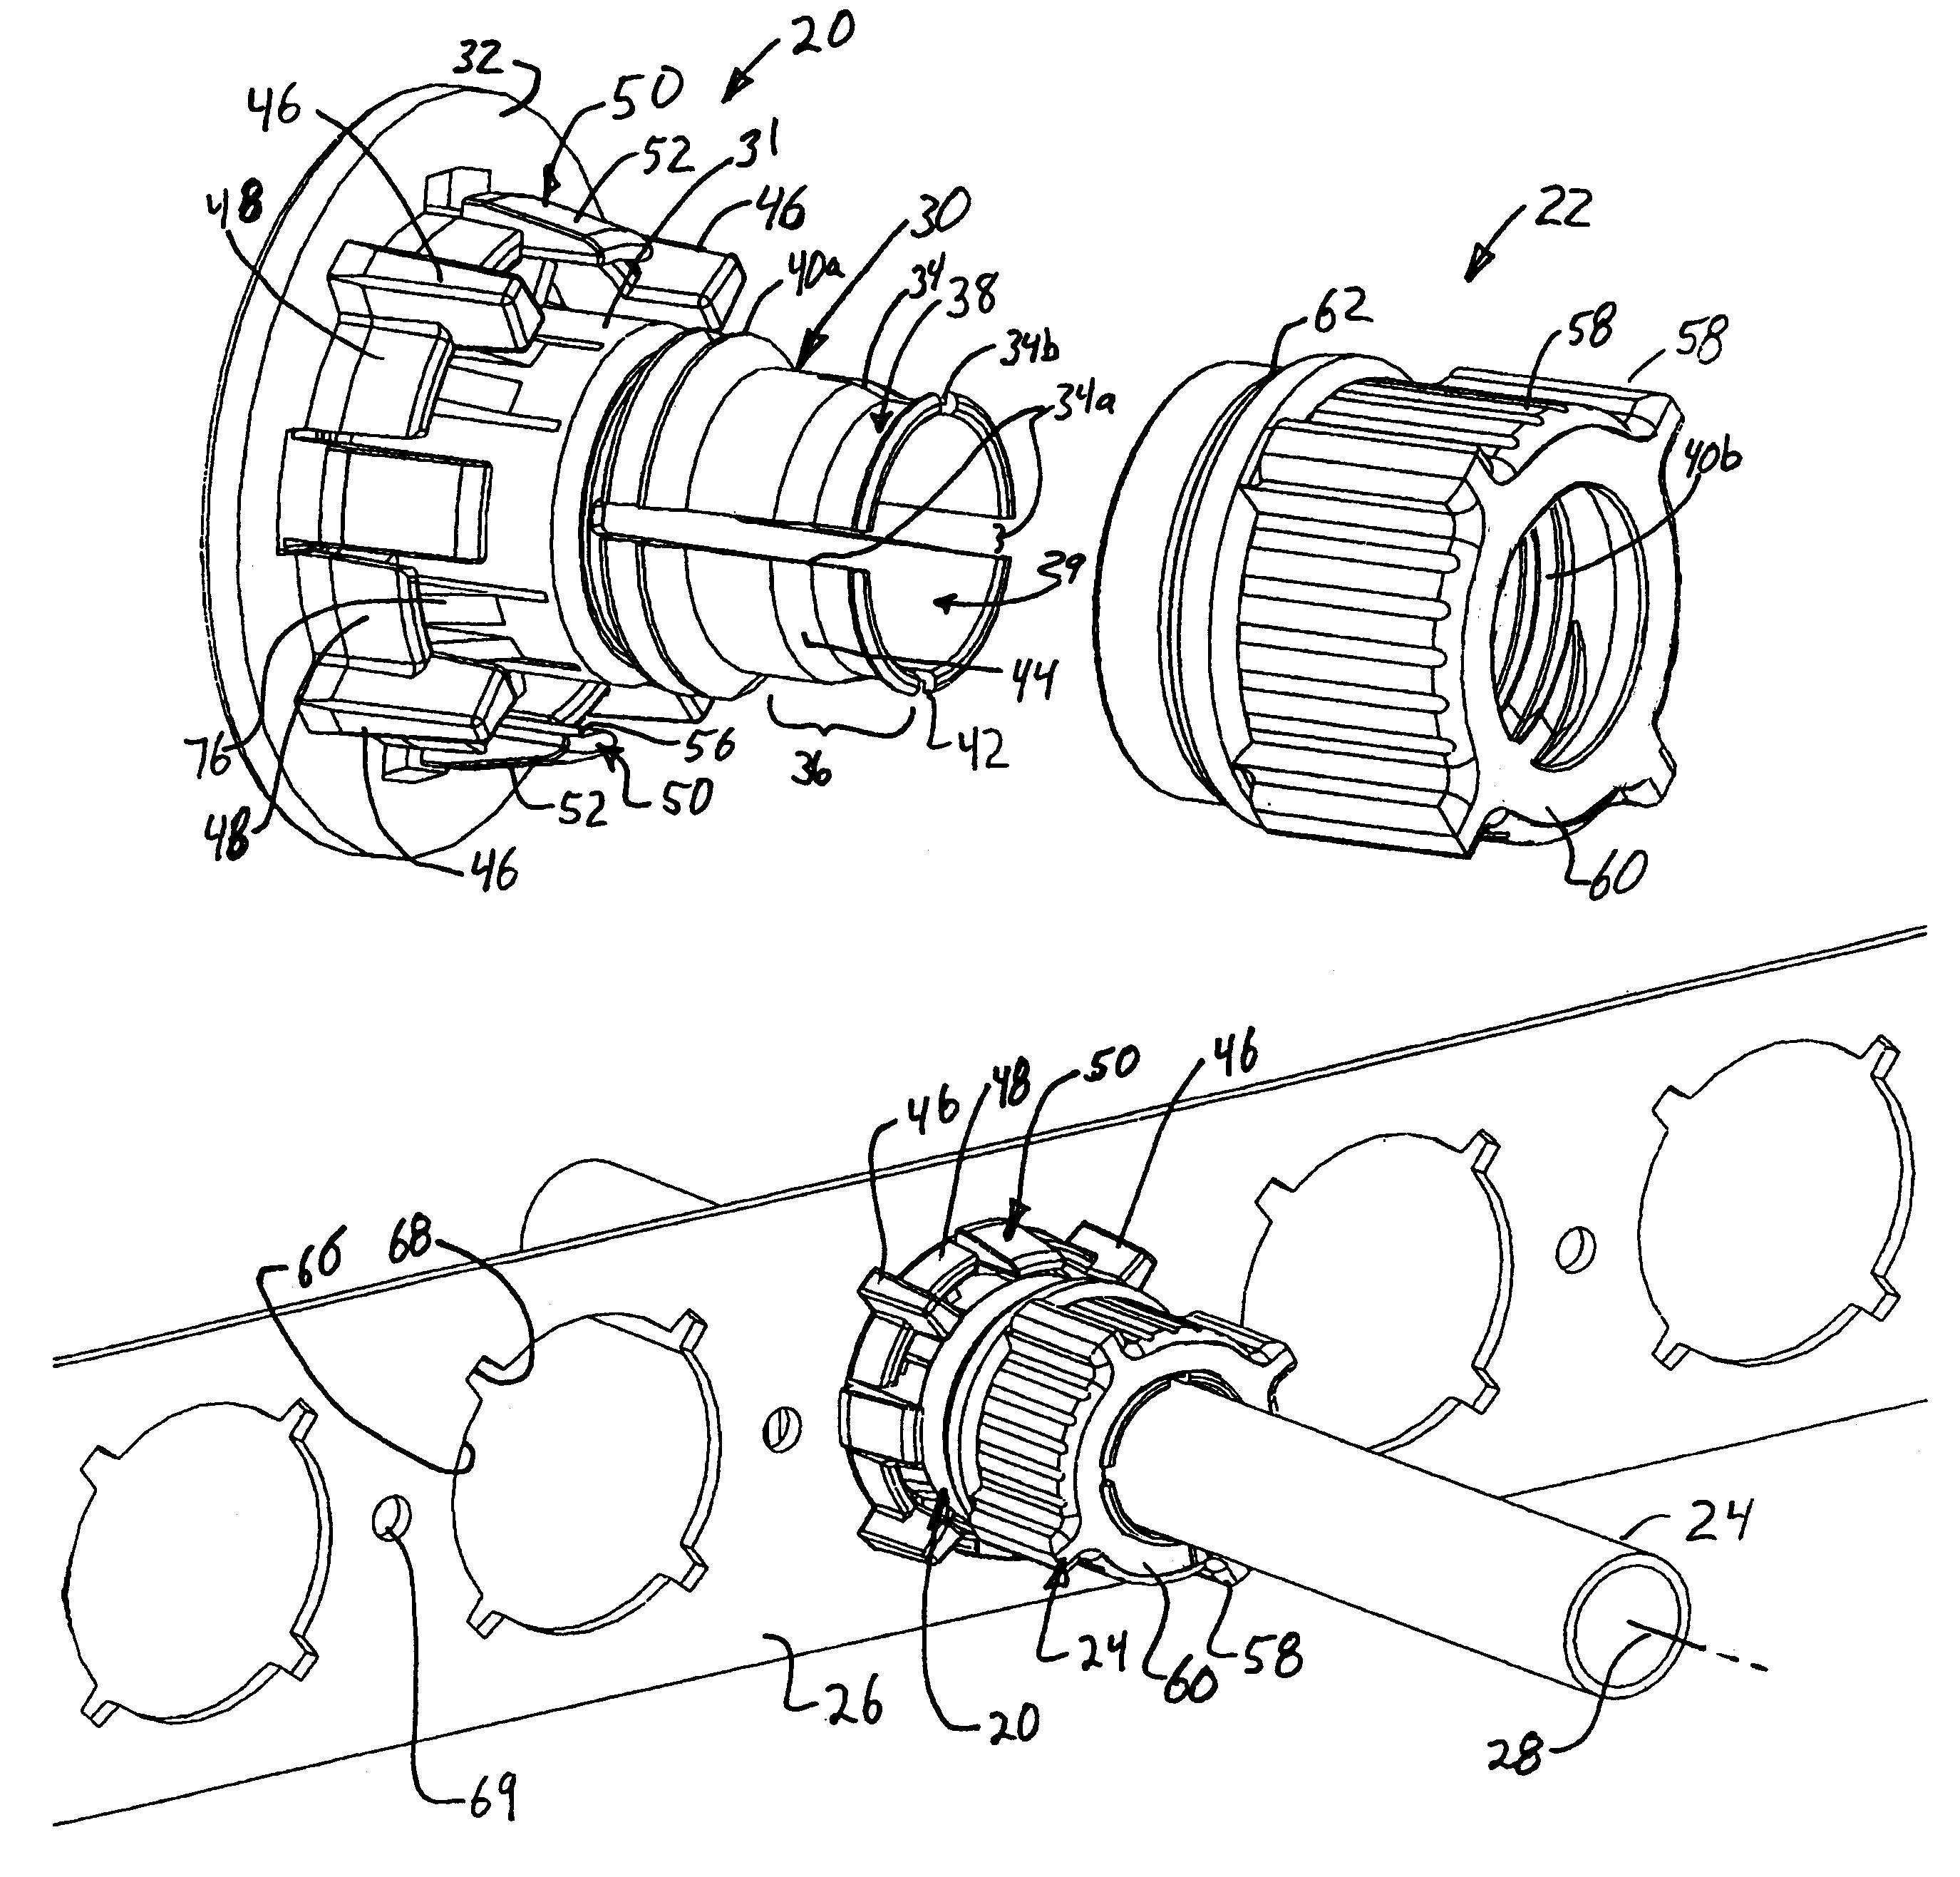 Anti-rotation pipe locator and holder